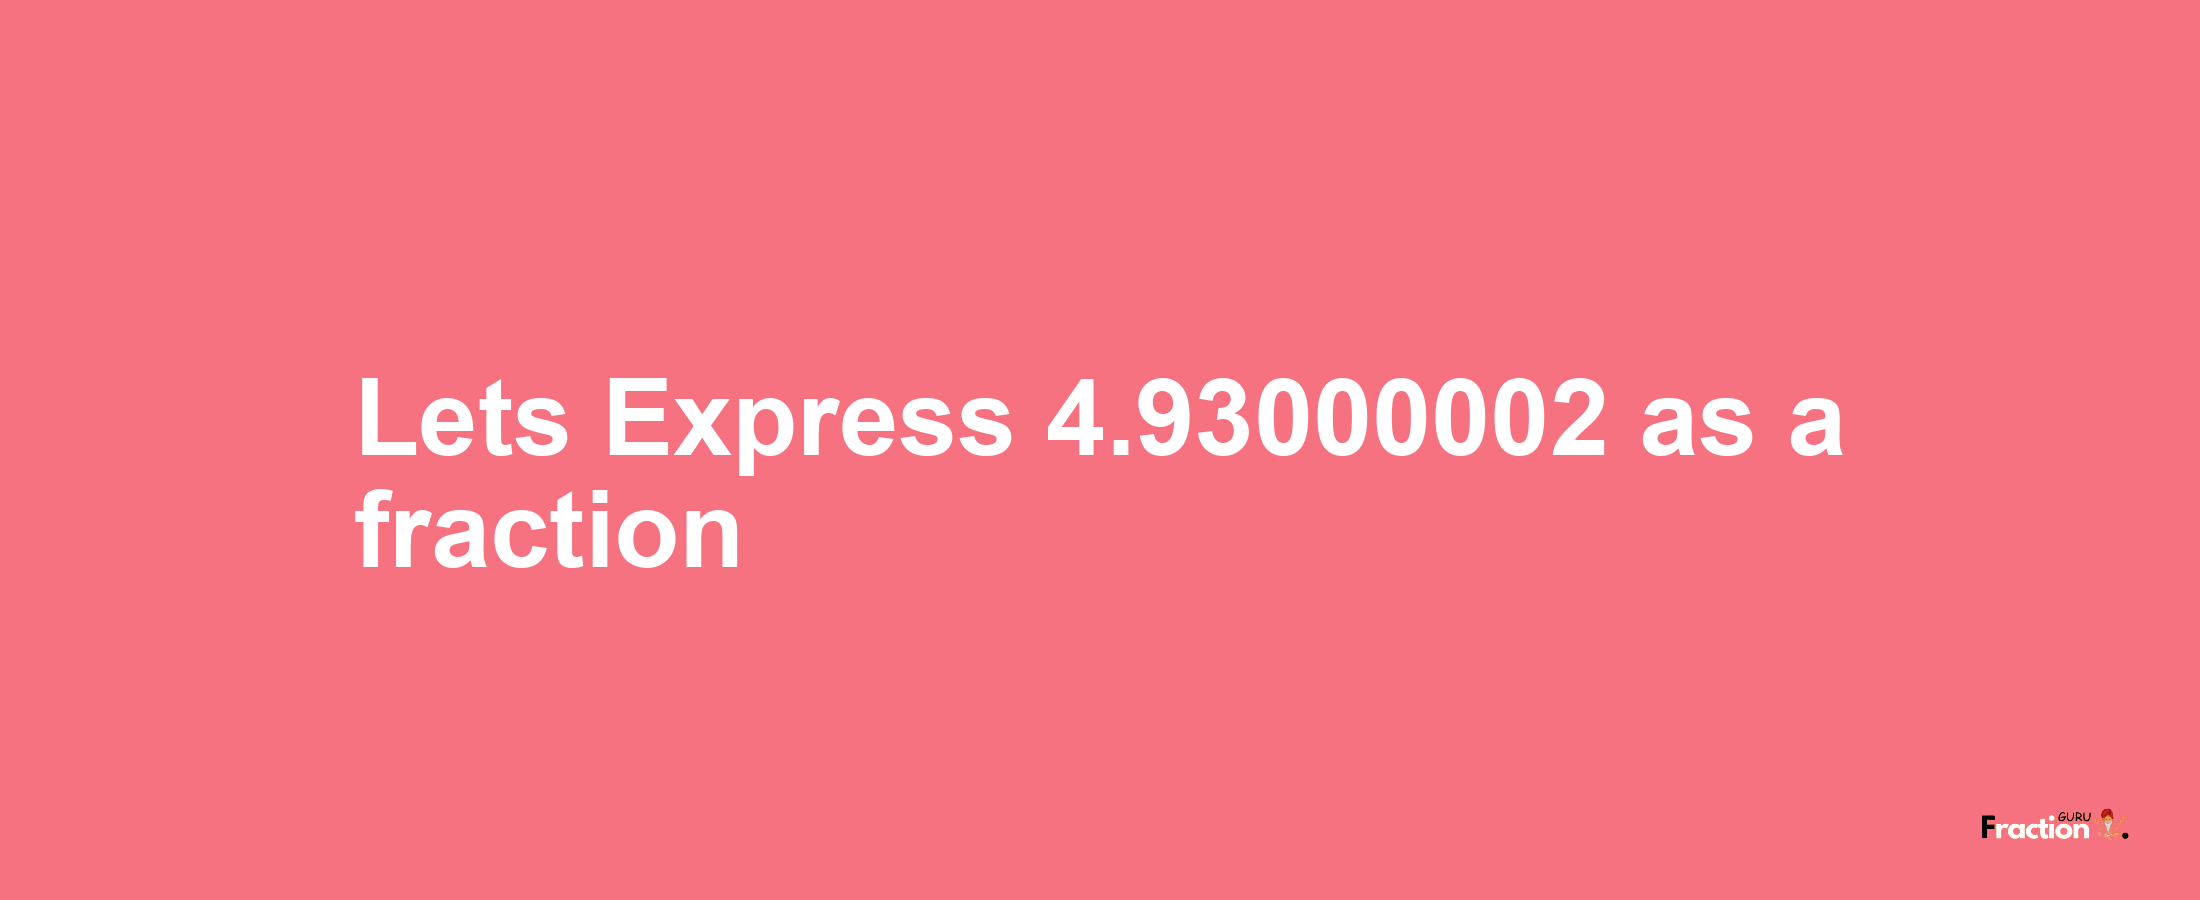 Lets Express 4.93000002 as afraction